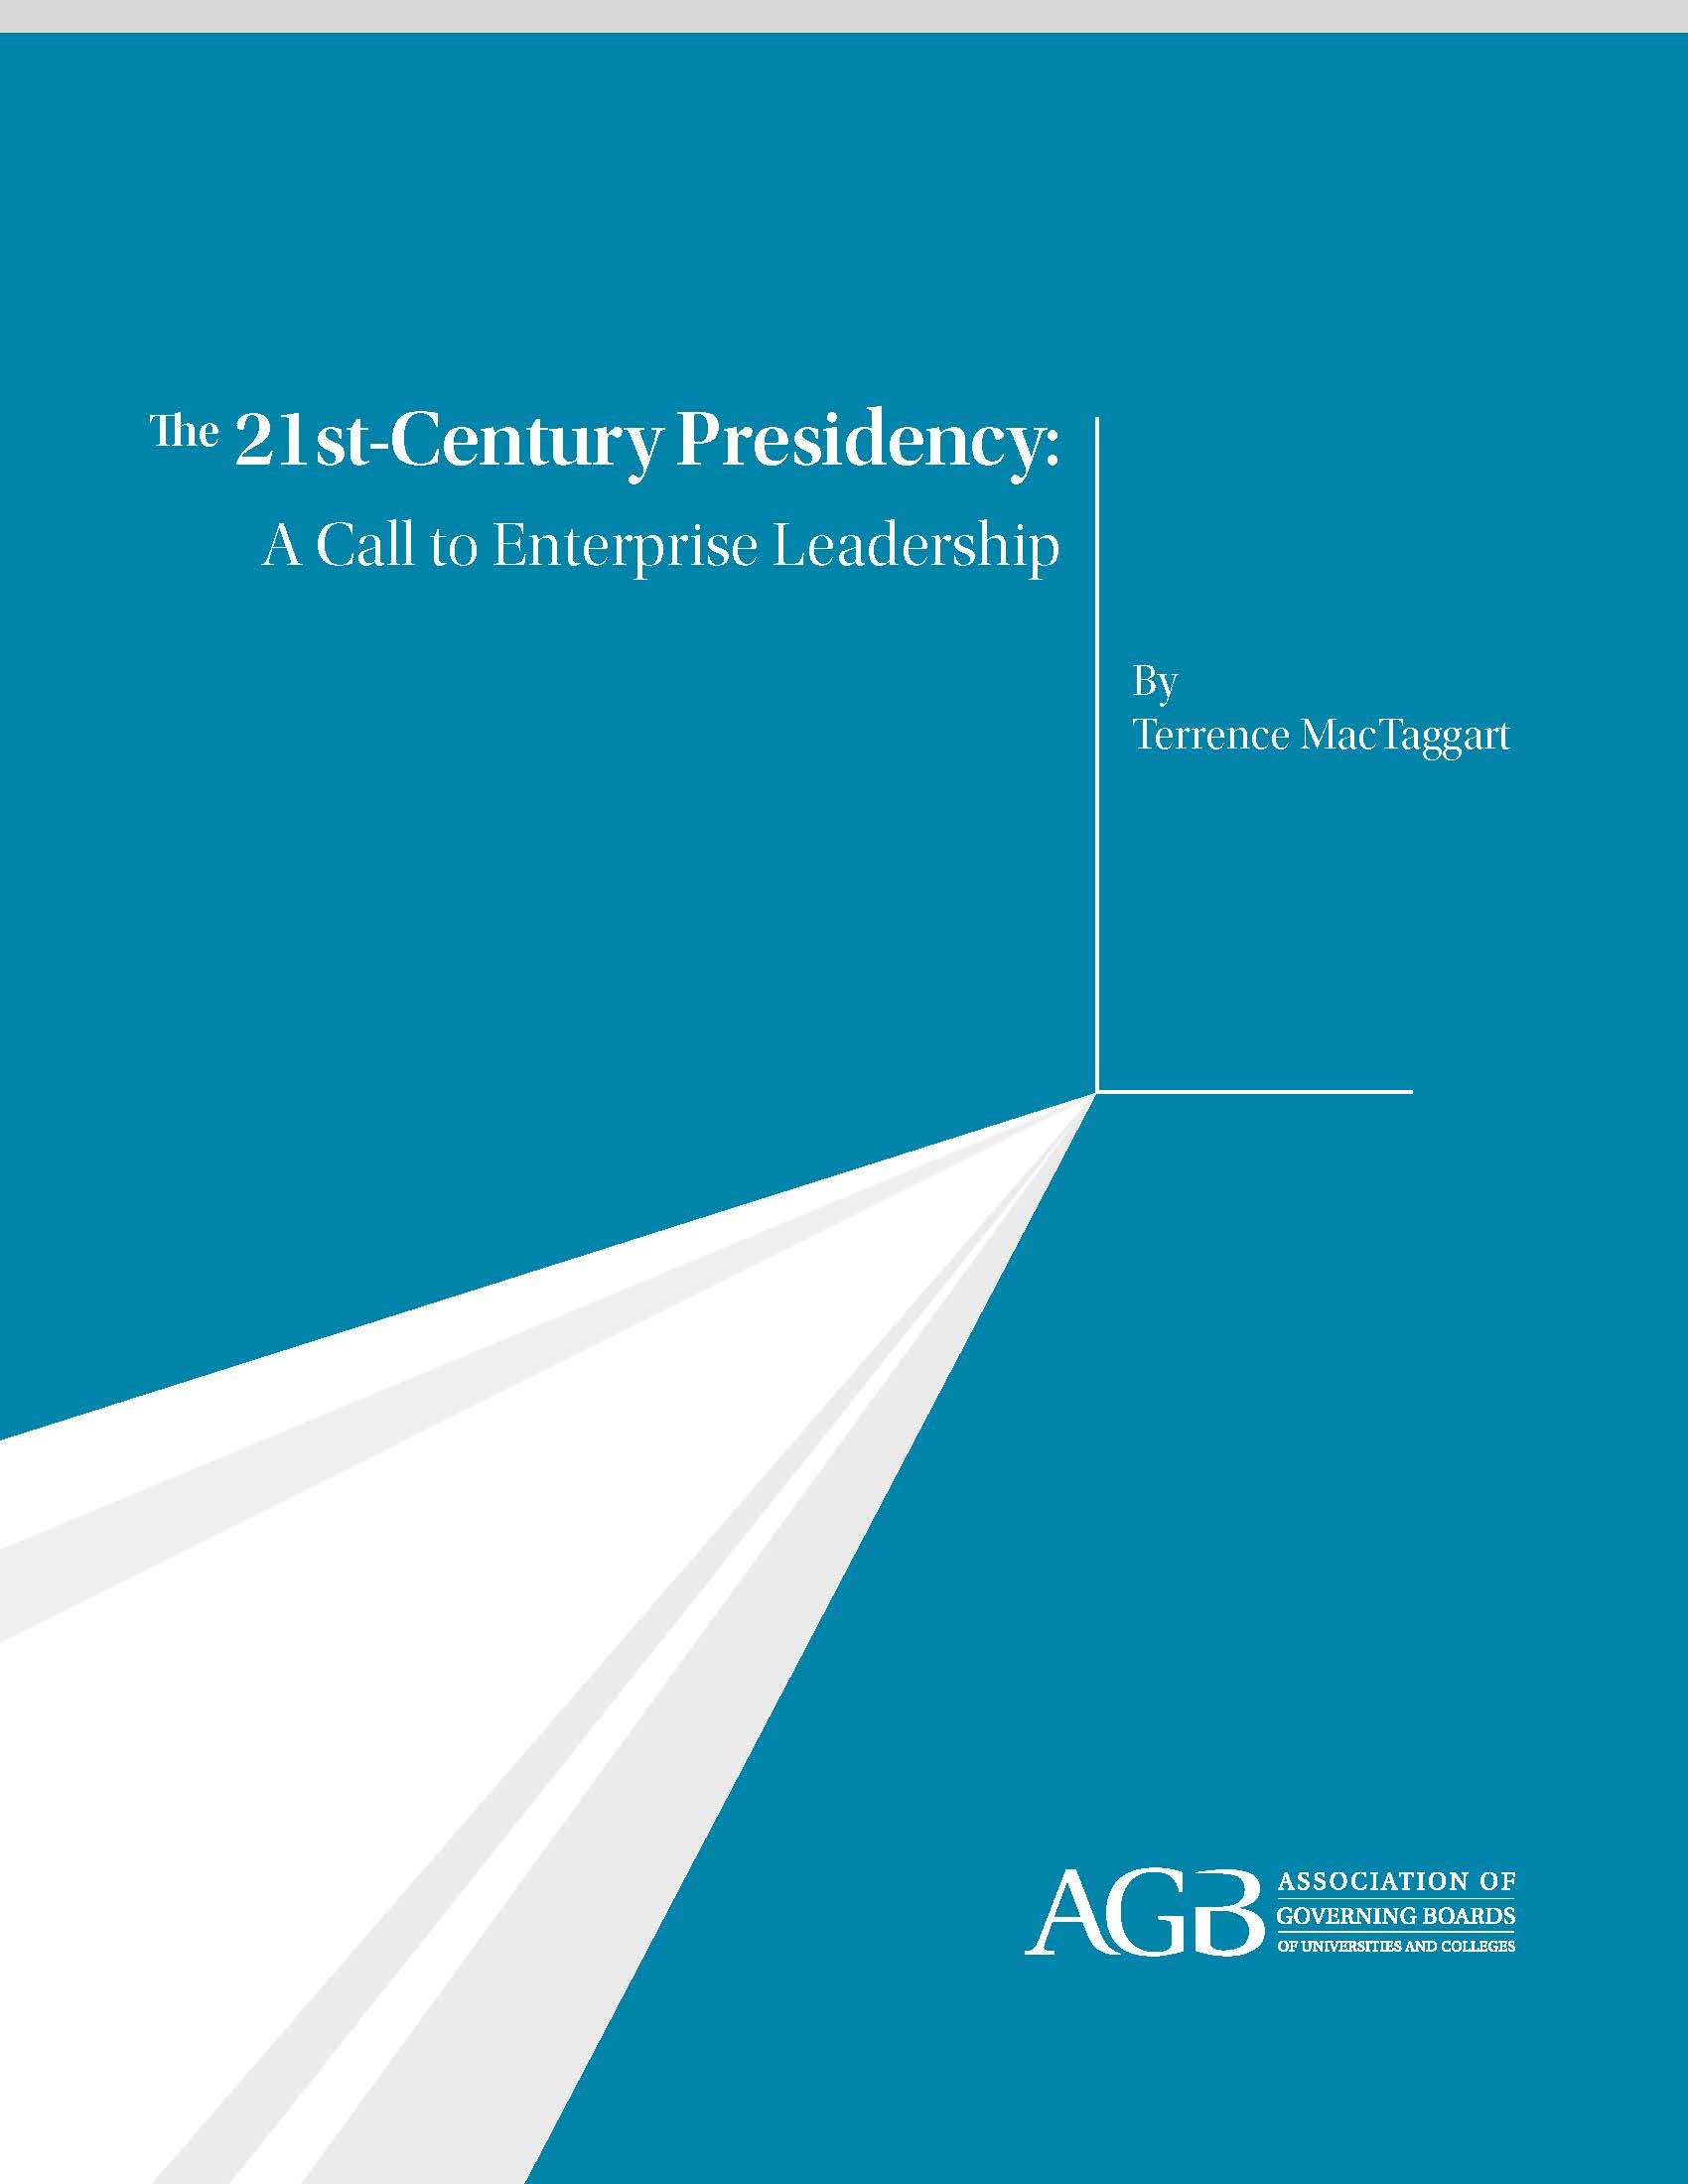 The 21st Century Presidency: A Call to Enterprise Leadership by Terrence MacTaggart